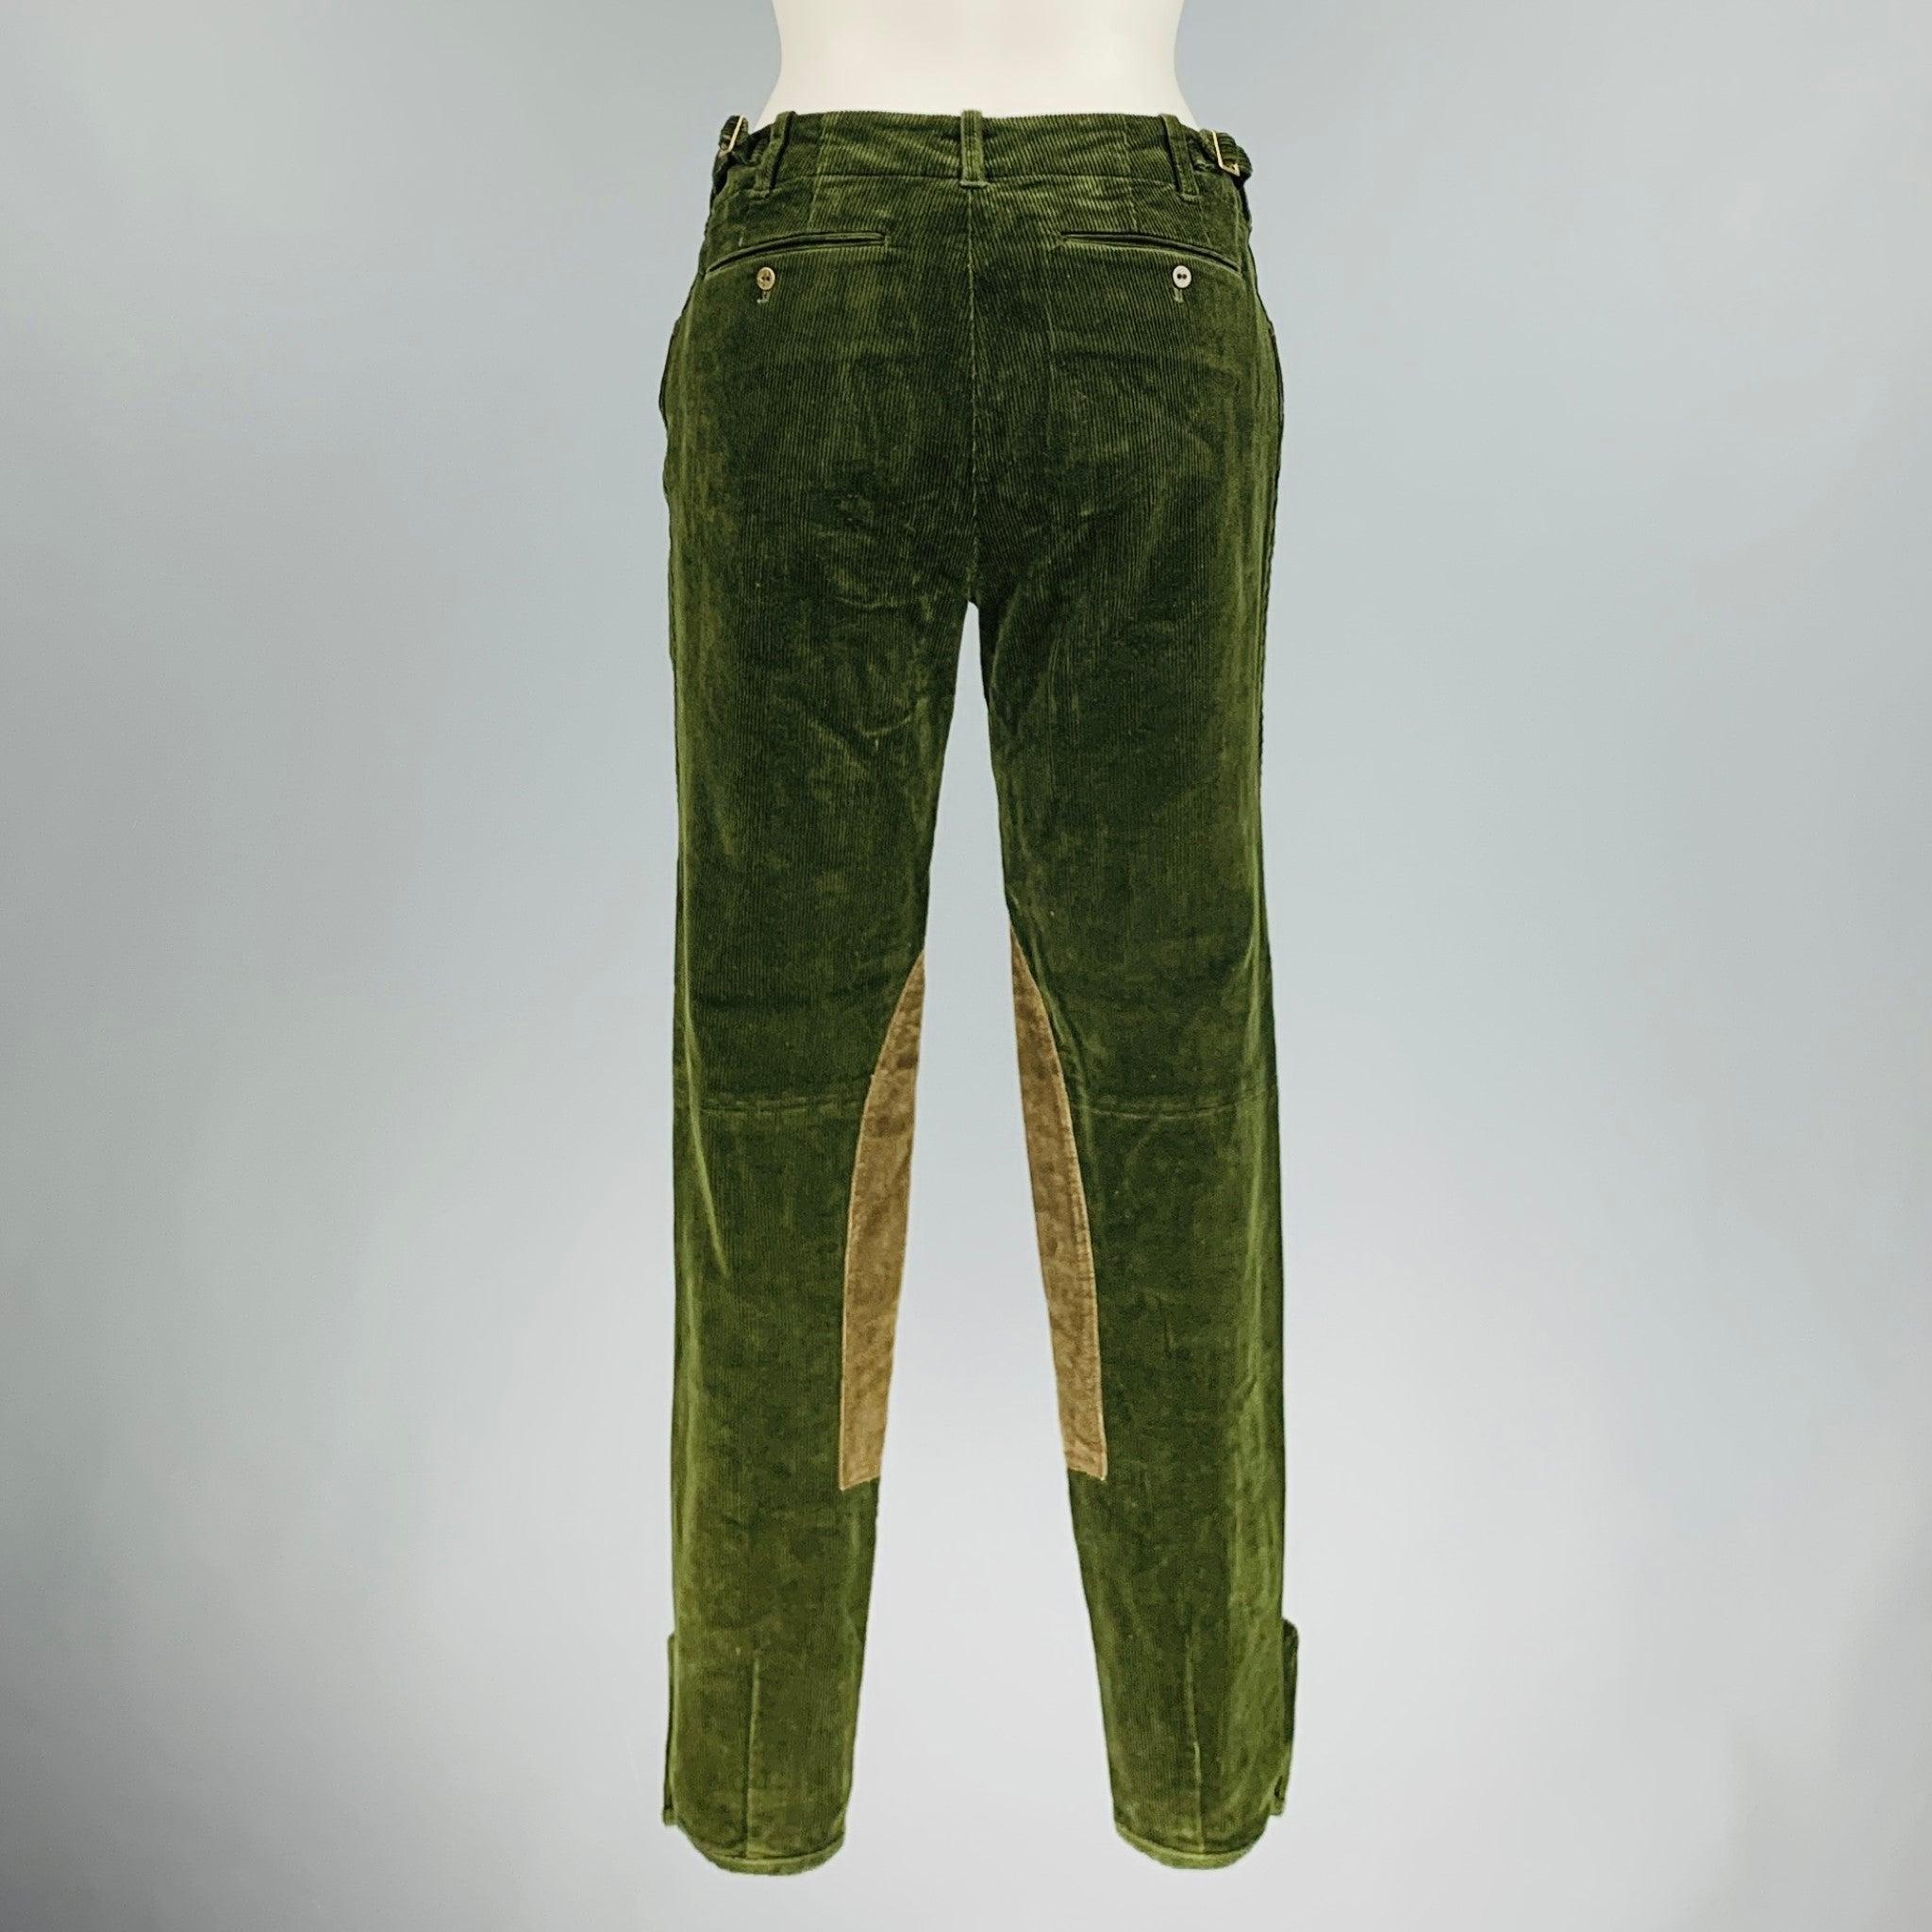 RALPH LAUREN Size 8 Green Olive Cotton Elastane Patchwork Suede Casual Pants In Excellent Condition For Sale In San Francisco, CA